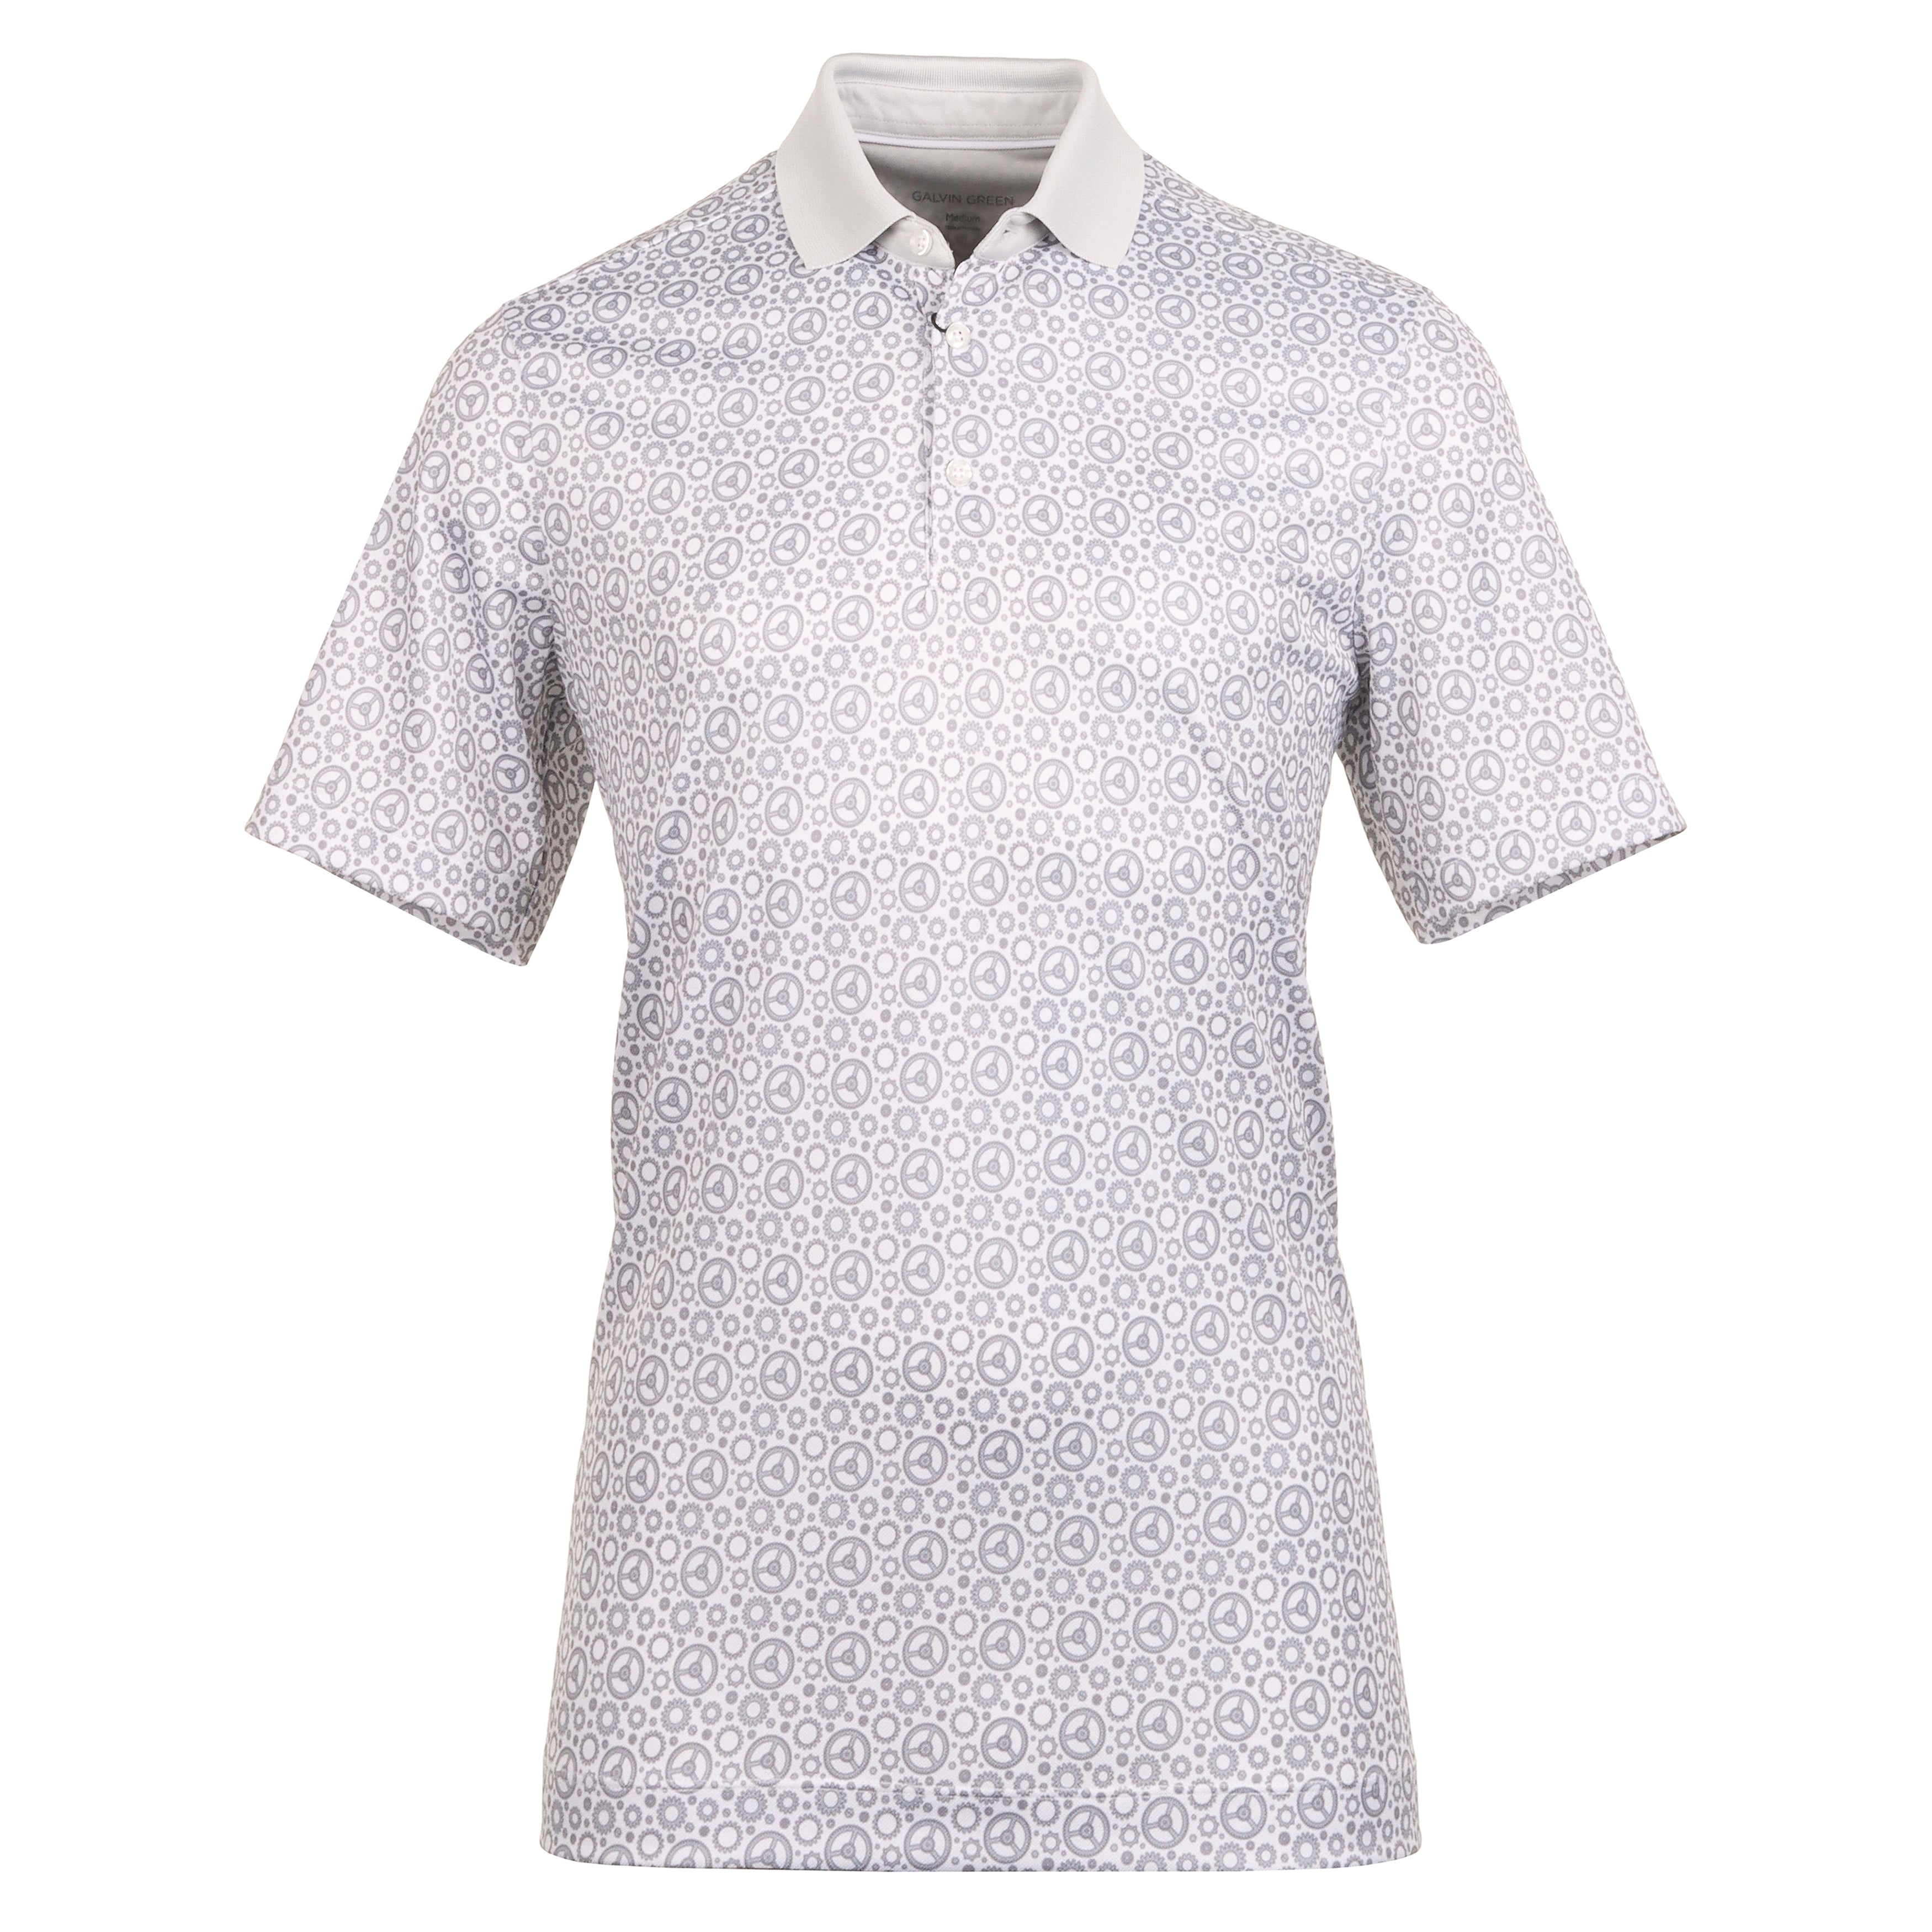 Galvin Green Miracle Ventil8+ Golf Shirt White Cool Grey 9235 ...